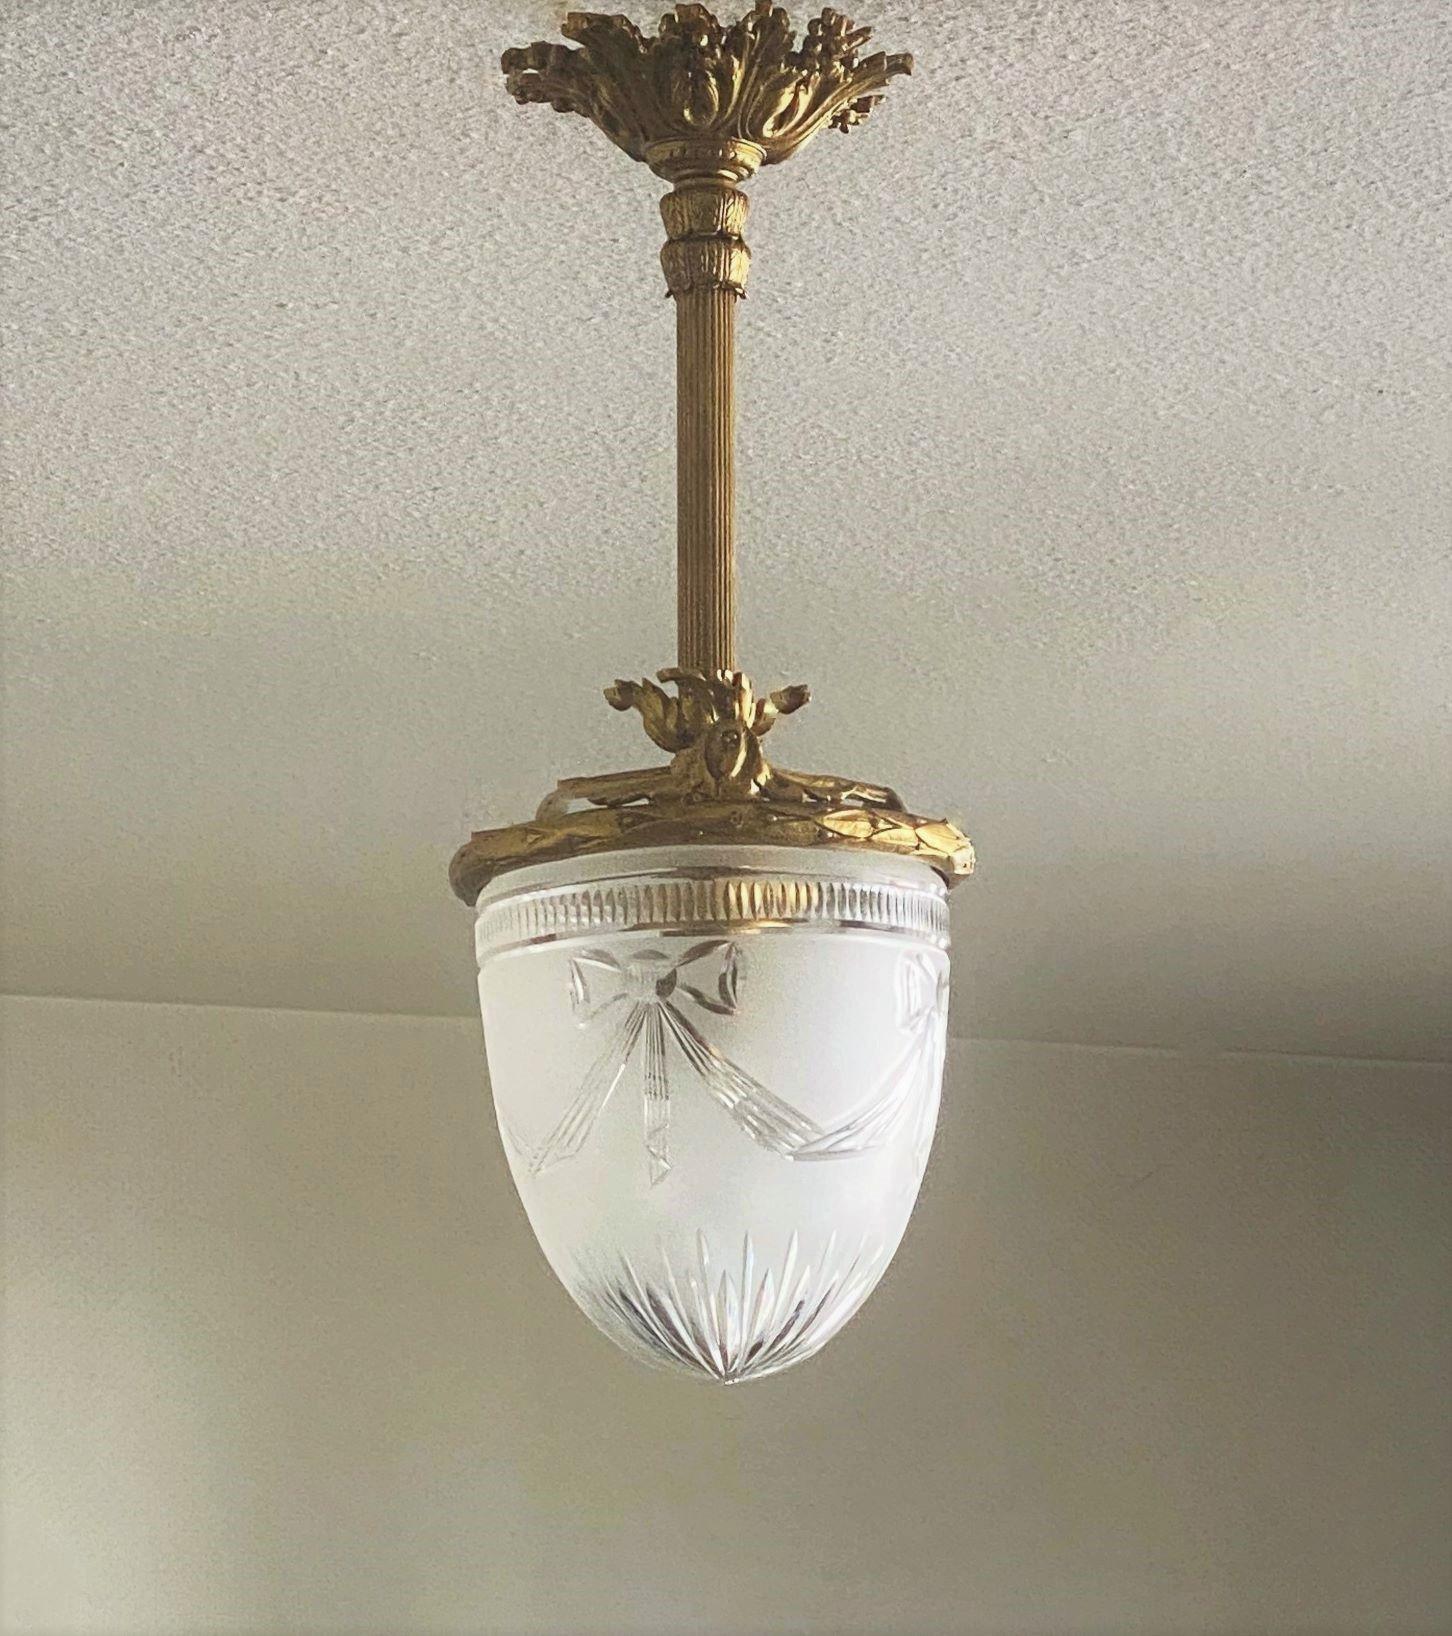 A lovely Art Deco gilt bronze and cut crystal chandelier or flush mount, France, 1920-1929. Bronze elegantly elaborate, crystal shade with cut ribbon motifs, large beautiful ceiling canopy. This wonderful piece is in fine vintage condition, great